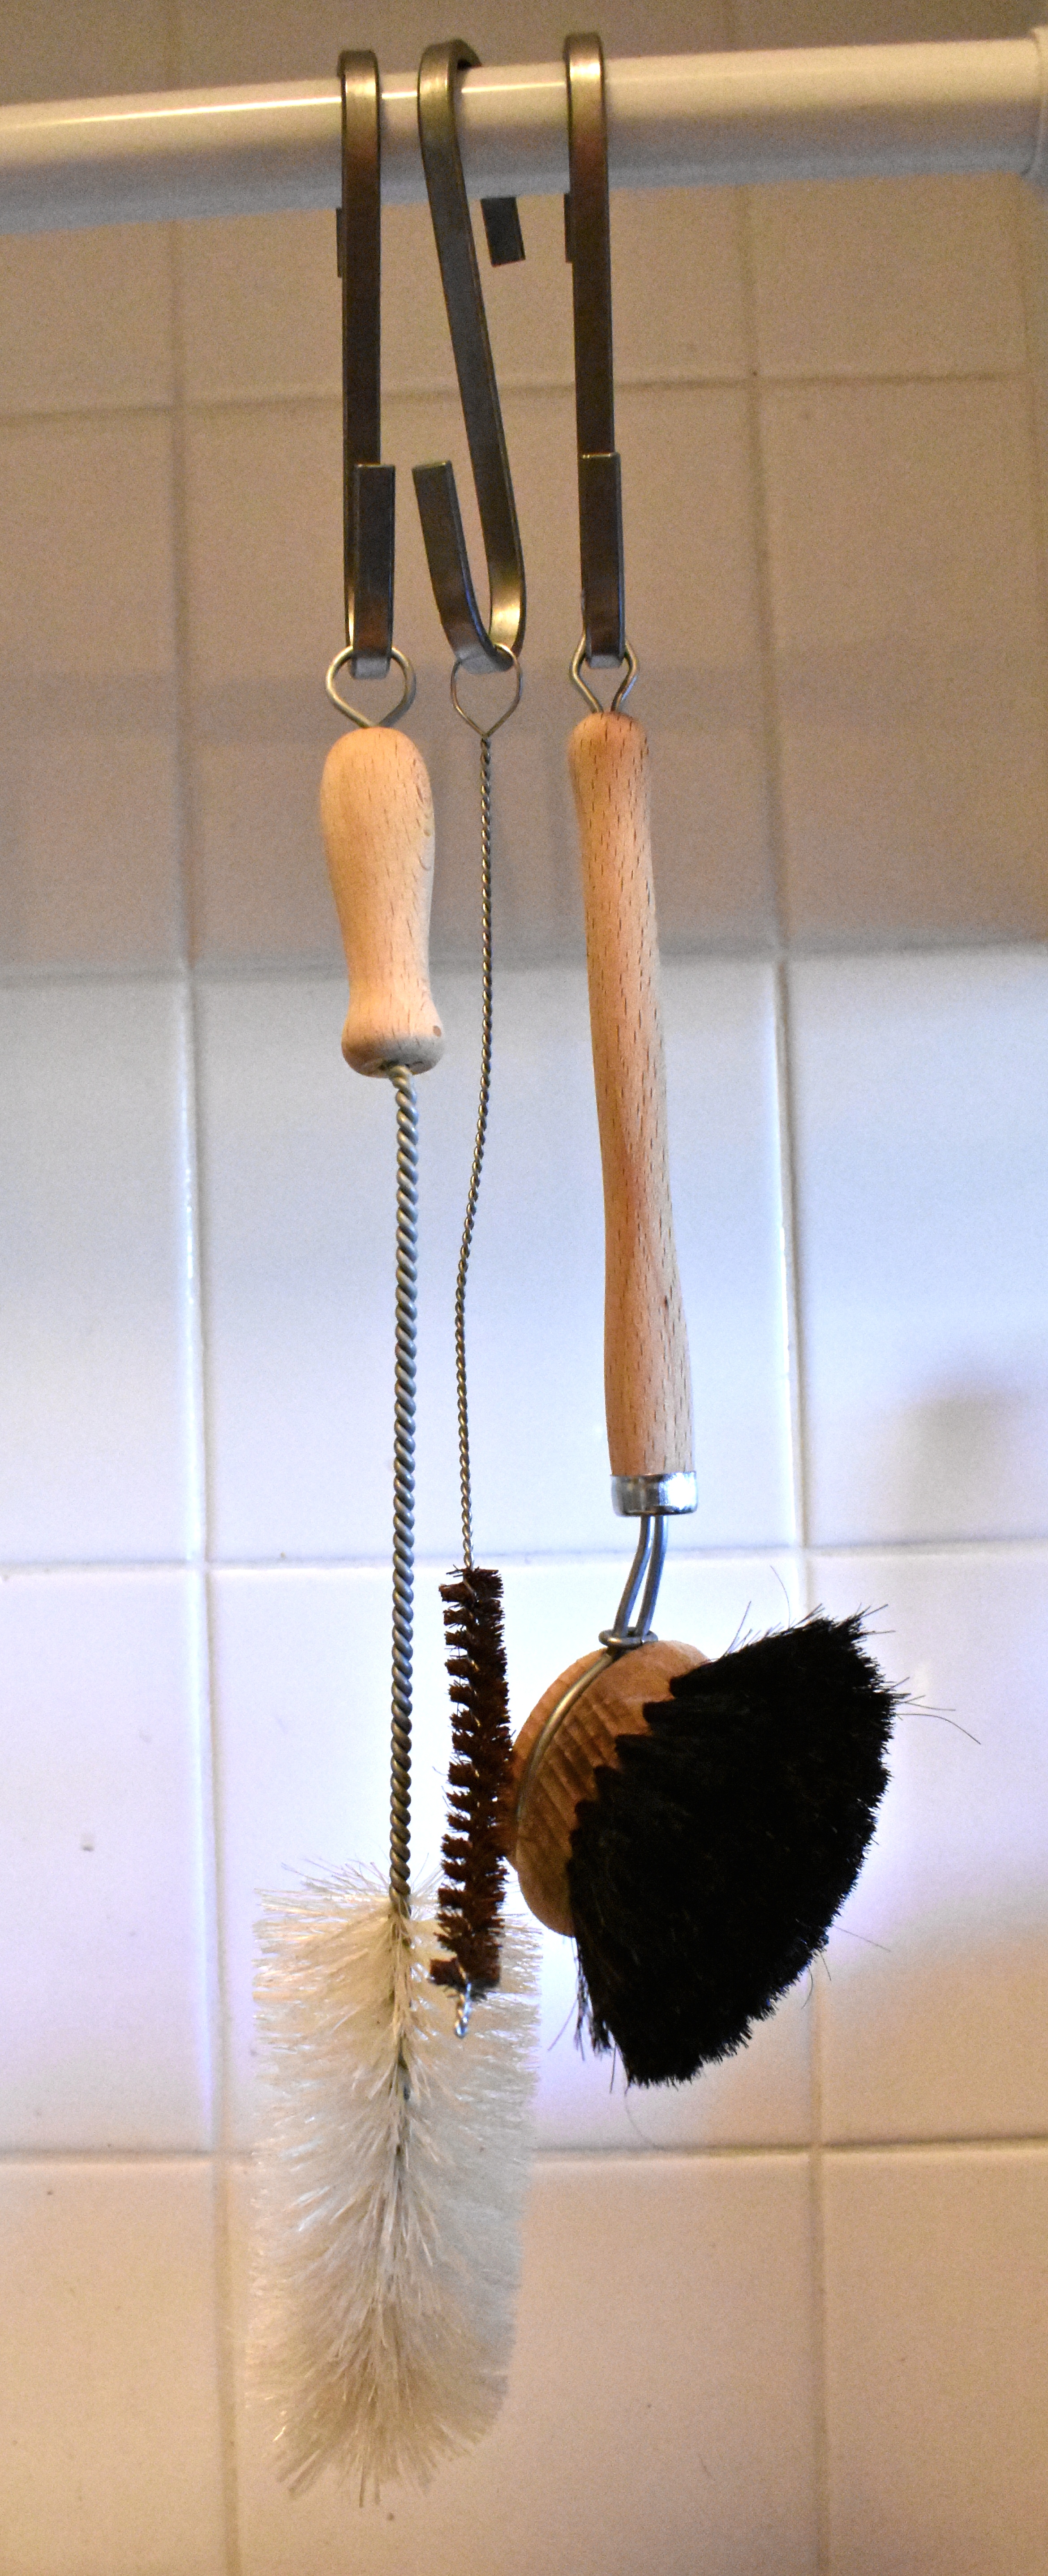 Ditch the dish sponge: Researchers say kitchen brushes are less germy, 2022-06-29